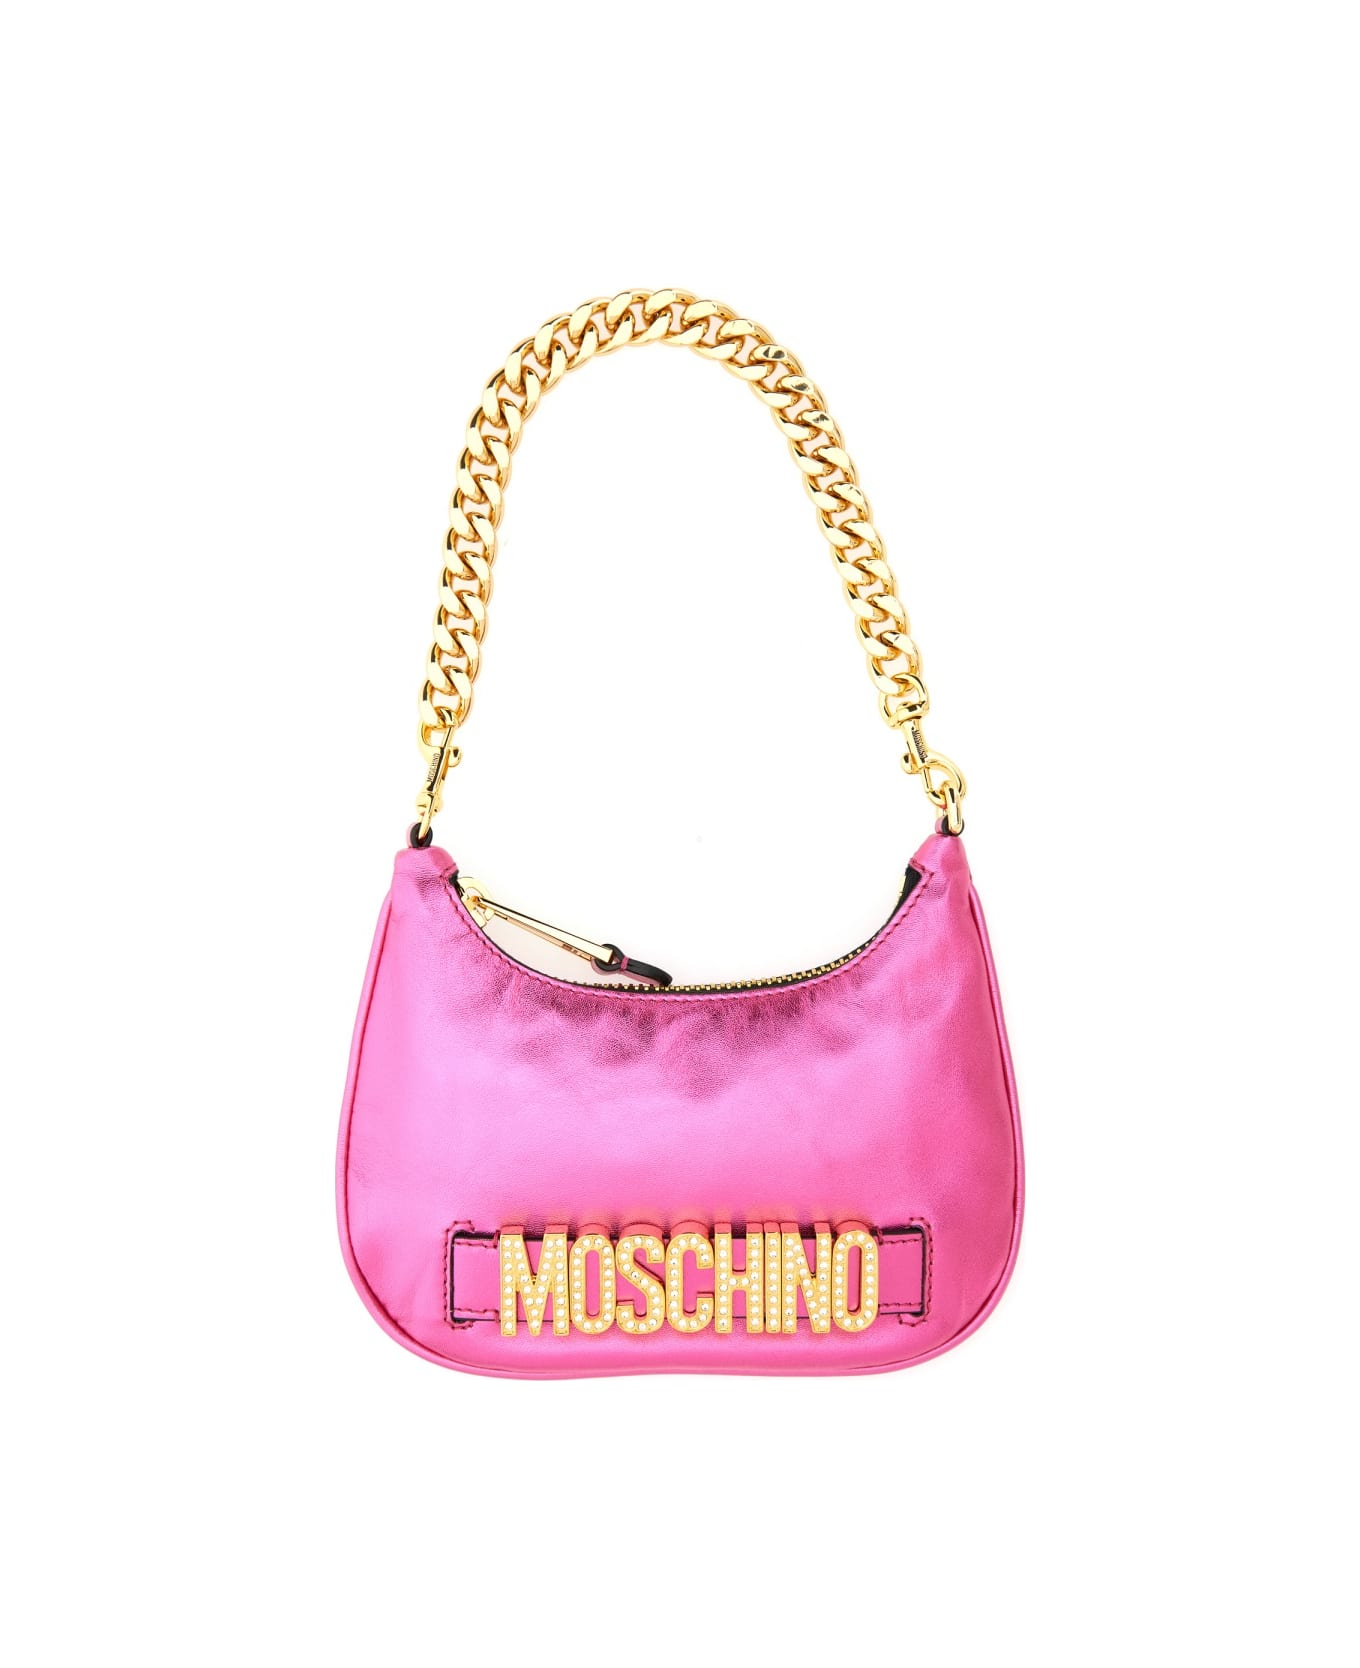 Moschino Bag With Lettering Logo - PINK